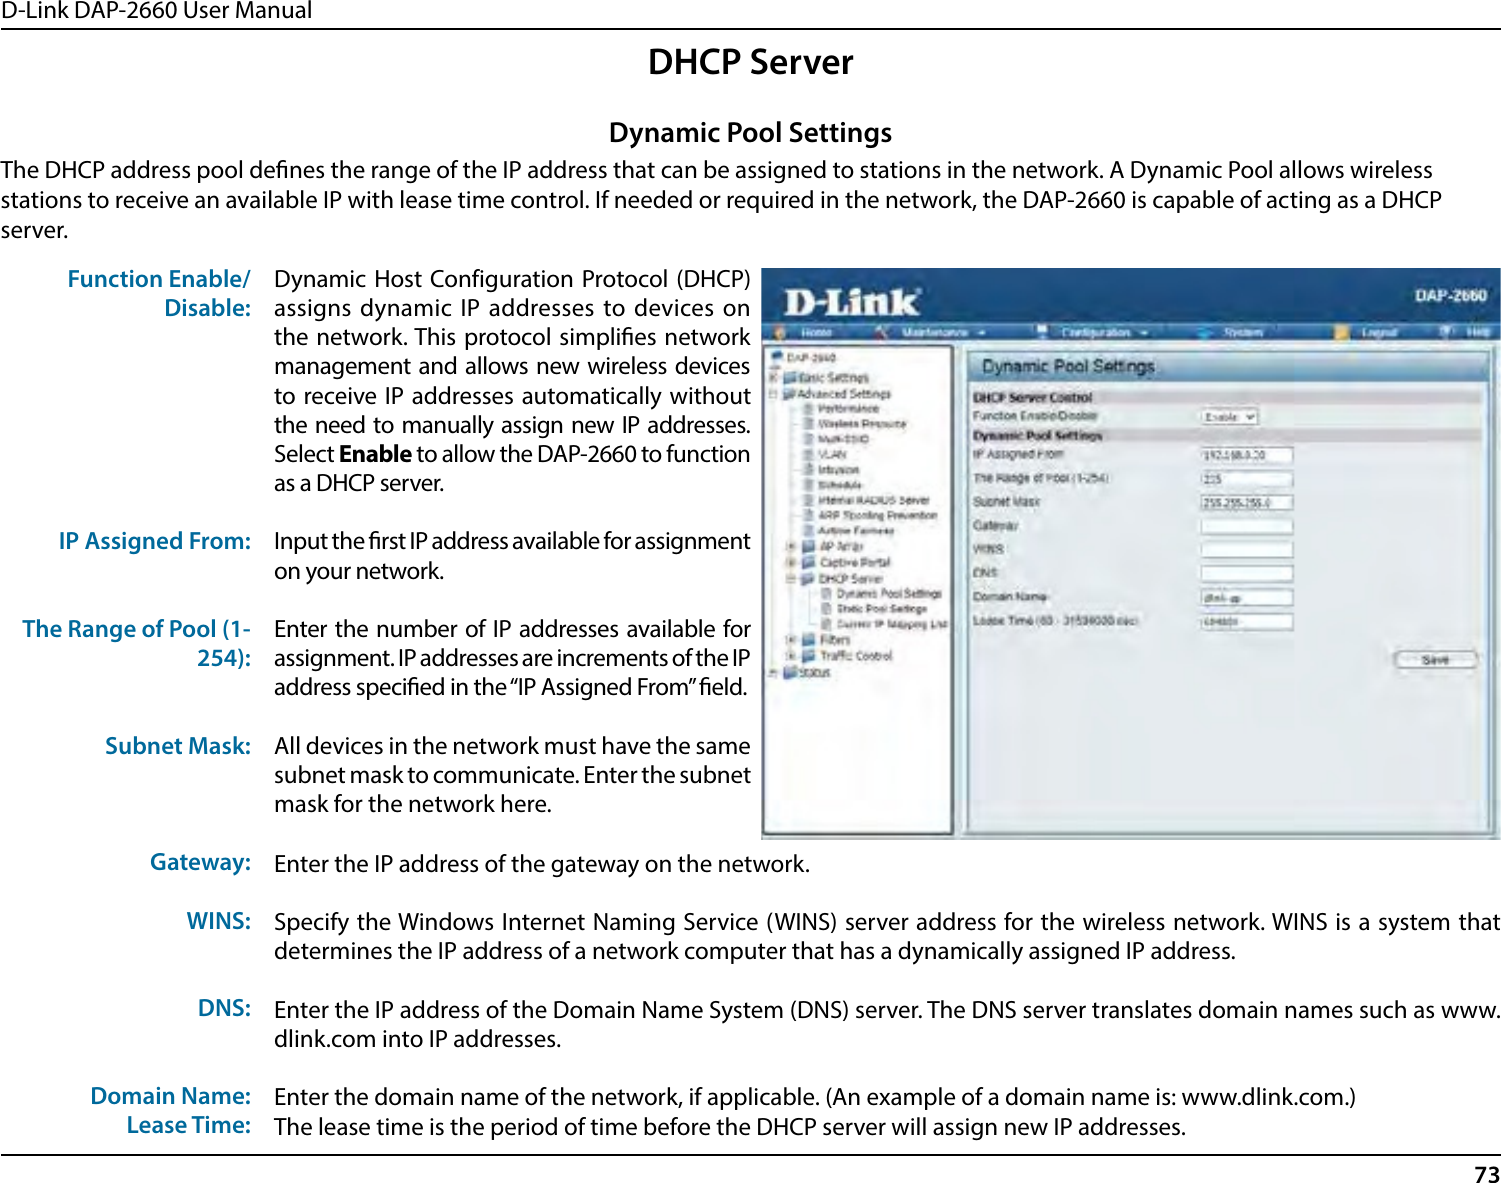 D-Link DAP-2660 User Manual73DHCP ServerThe DHCP address pool denes the range of the IP address that can be assigned to stations in the network. A Dynamic Pool allows wireless stations to receive an available IP with lease time control. If needed or required in the network, the DAP-2660 is capable of acting as a DHCP server.Function Enable/Disable:IP Assigned From:The Range of Pool (1-254):Subnet Mask:Gateway:WINS:DNS:Domain Name:Lease Time:Dynamic Host Configuration Protocol (DHCP) assigns dynamic IP addresses to devices on the network. This protocol simplies network management and allows new wireless devices to receive IP addresses automatically without the need to manually assign new IP addresses. Select Enable to allow the DAP-2660 to function as a DHCP server.Input the rst IP address available for assignment on your network.Enter the number of IP addresses available for assignment. IP addresses are increments of the IP address specied in the “IP Assigned From” eld.All devices in the network must have the same subnet mask to communicate. Enter the subnet mask for the network here.Dynamic Pool SettingsEnter the IP address of the gateway on the network.Specify the Windows Internet Naming Service (WINS) server address for the wireless network. WINS is a system that determines the IP address of a network computer that has a dynamically assigned IP address.Enter the IP address of the Domain Name System (DNS) server. The DNS server translates domain names such as www.dlink.com into IP addresses.Enter the domain name of the network, if applicable. (An example of a domain name is: www.dlink.com.)The lease time is the period of time before the DHCP server will assign new IP addresses.